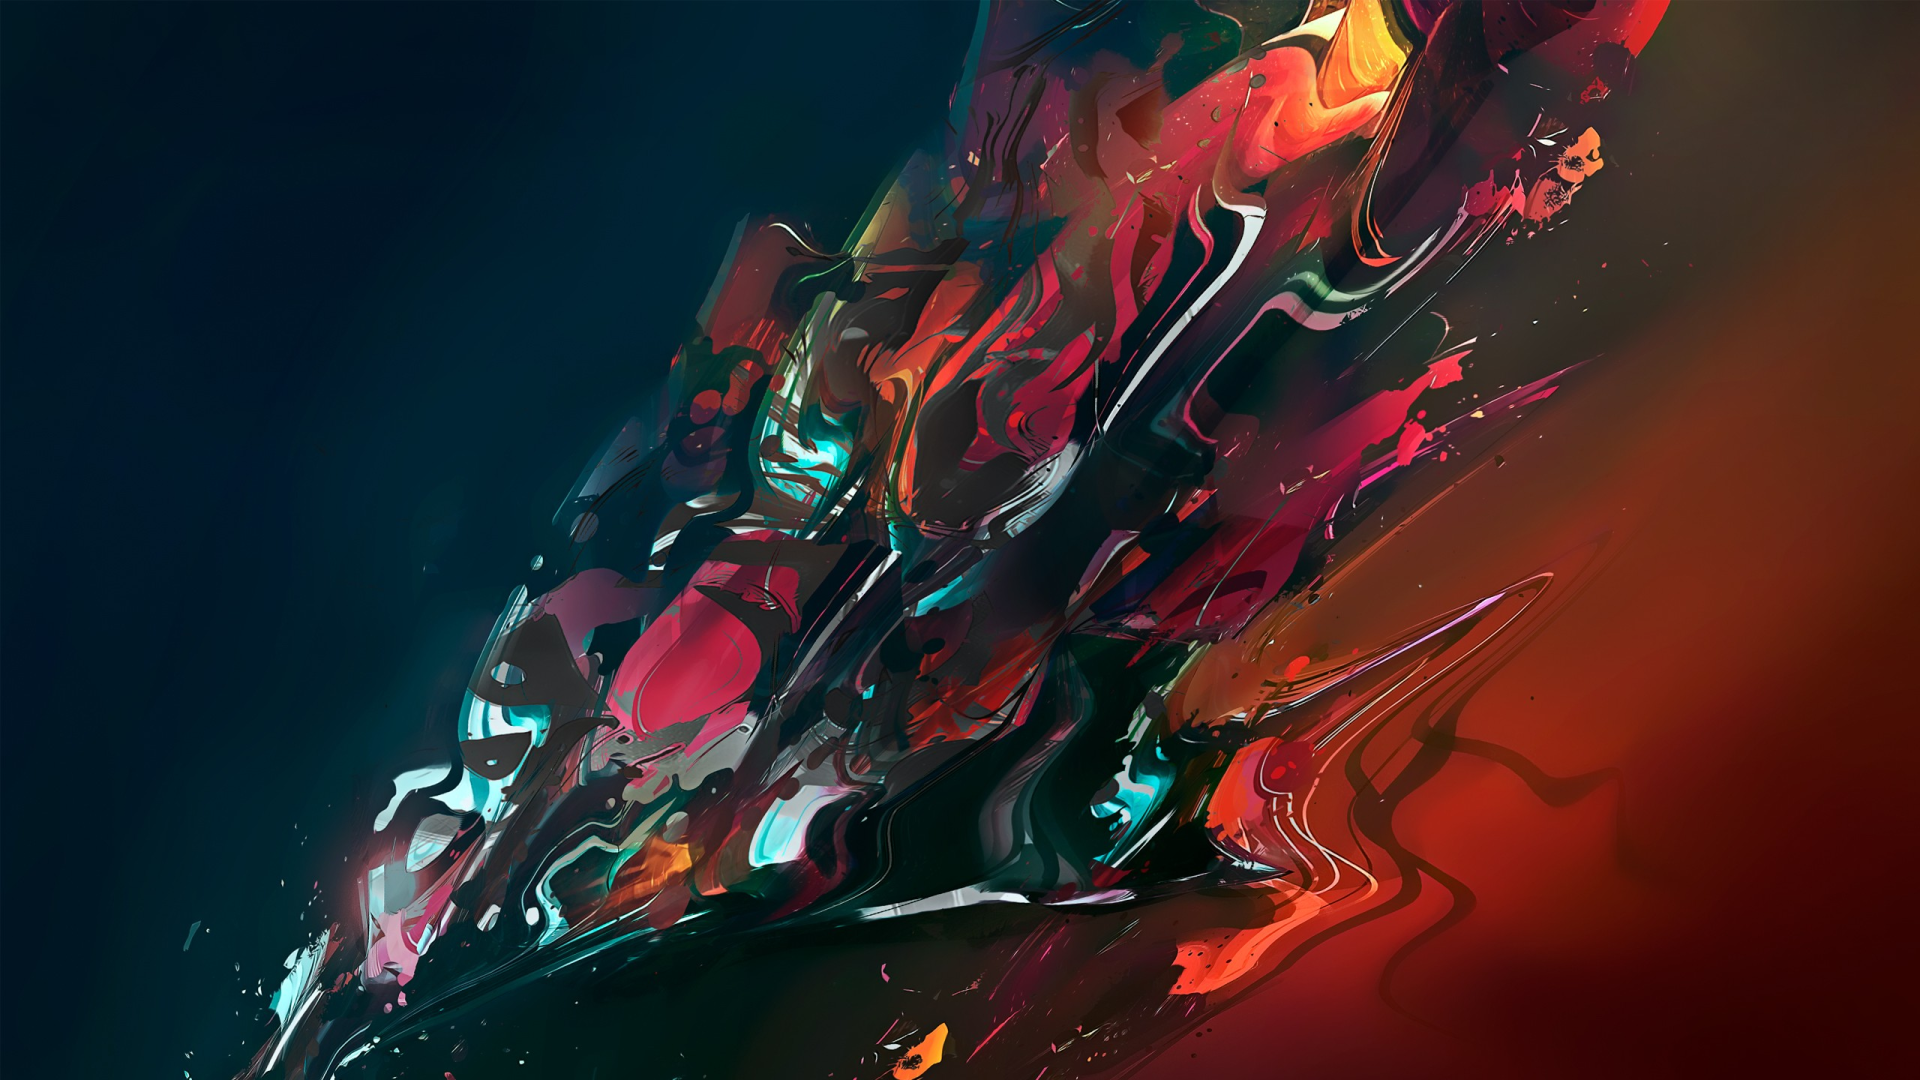 Abstract Digital Art Melting Colorful 1920x1080